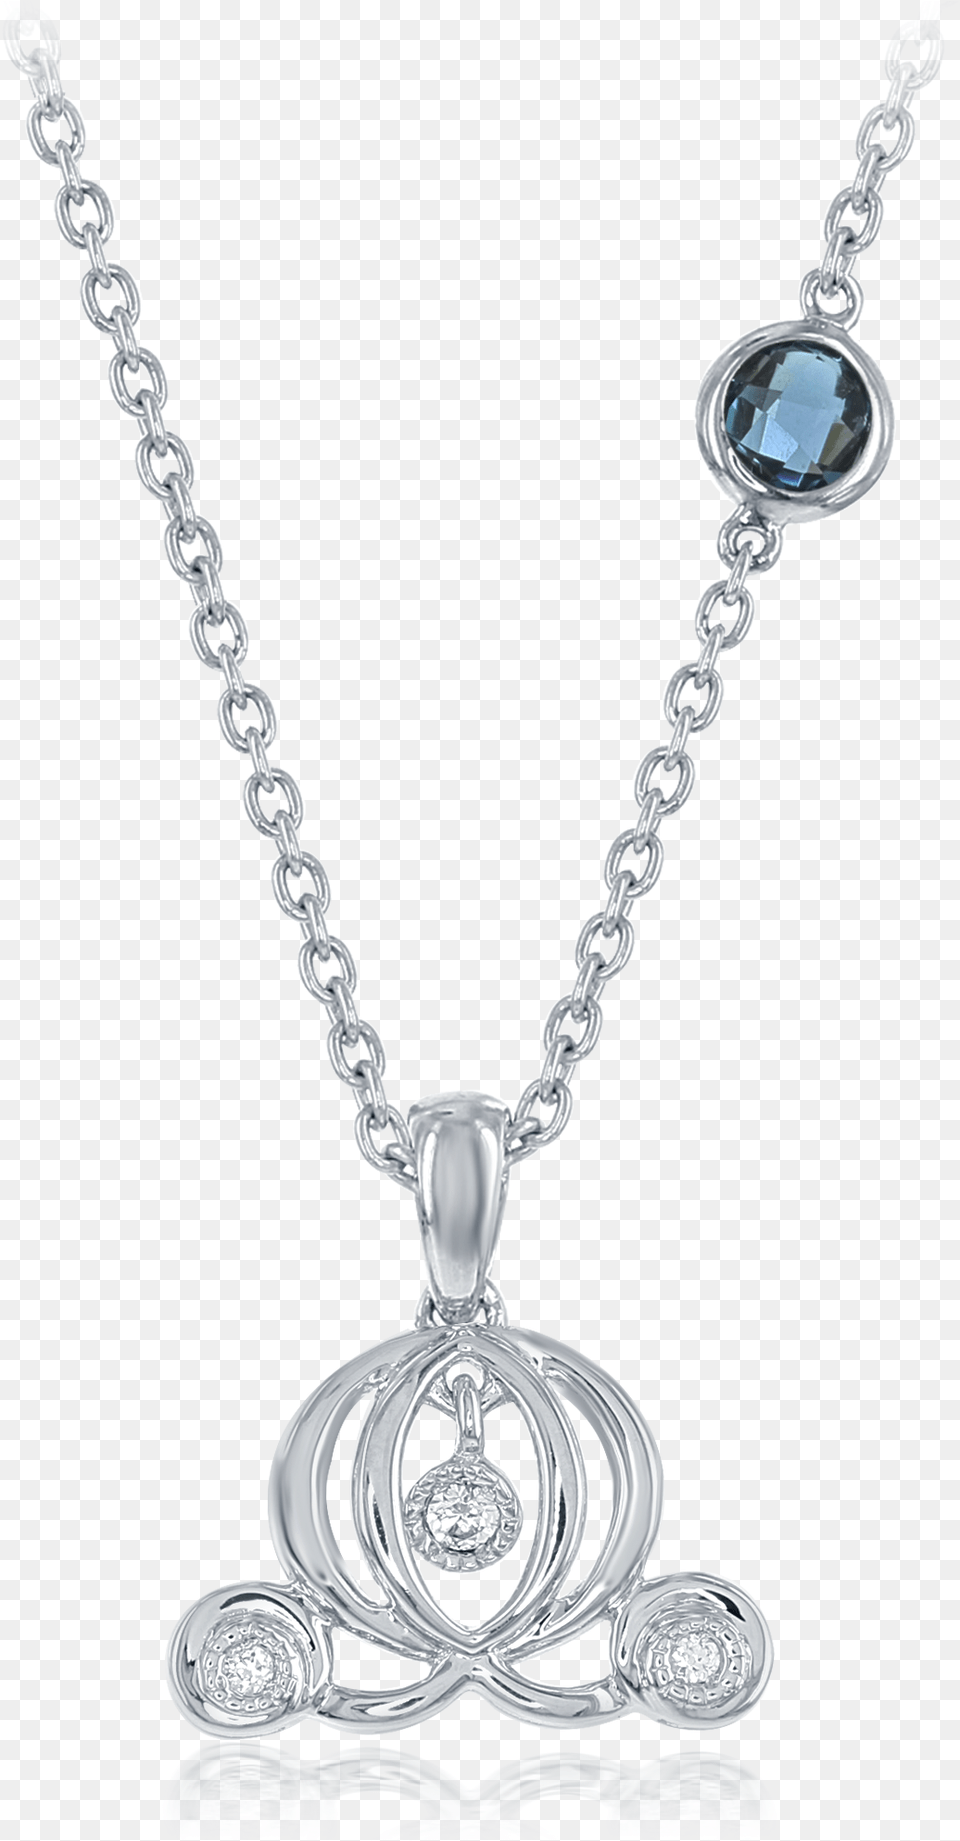 Disney Enchanted Cinderella Carriage Necklace, Accessories, Jewelry, Diamond, Gemstone Free Png Download